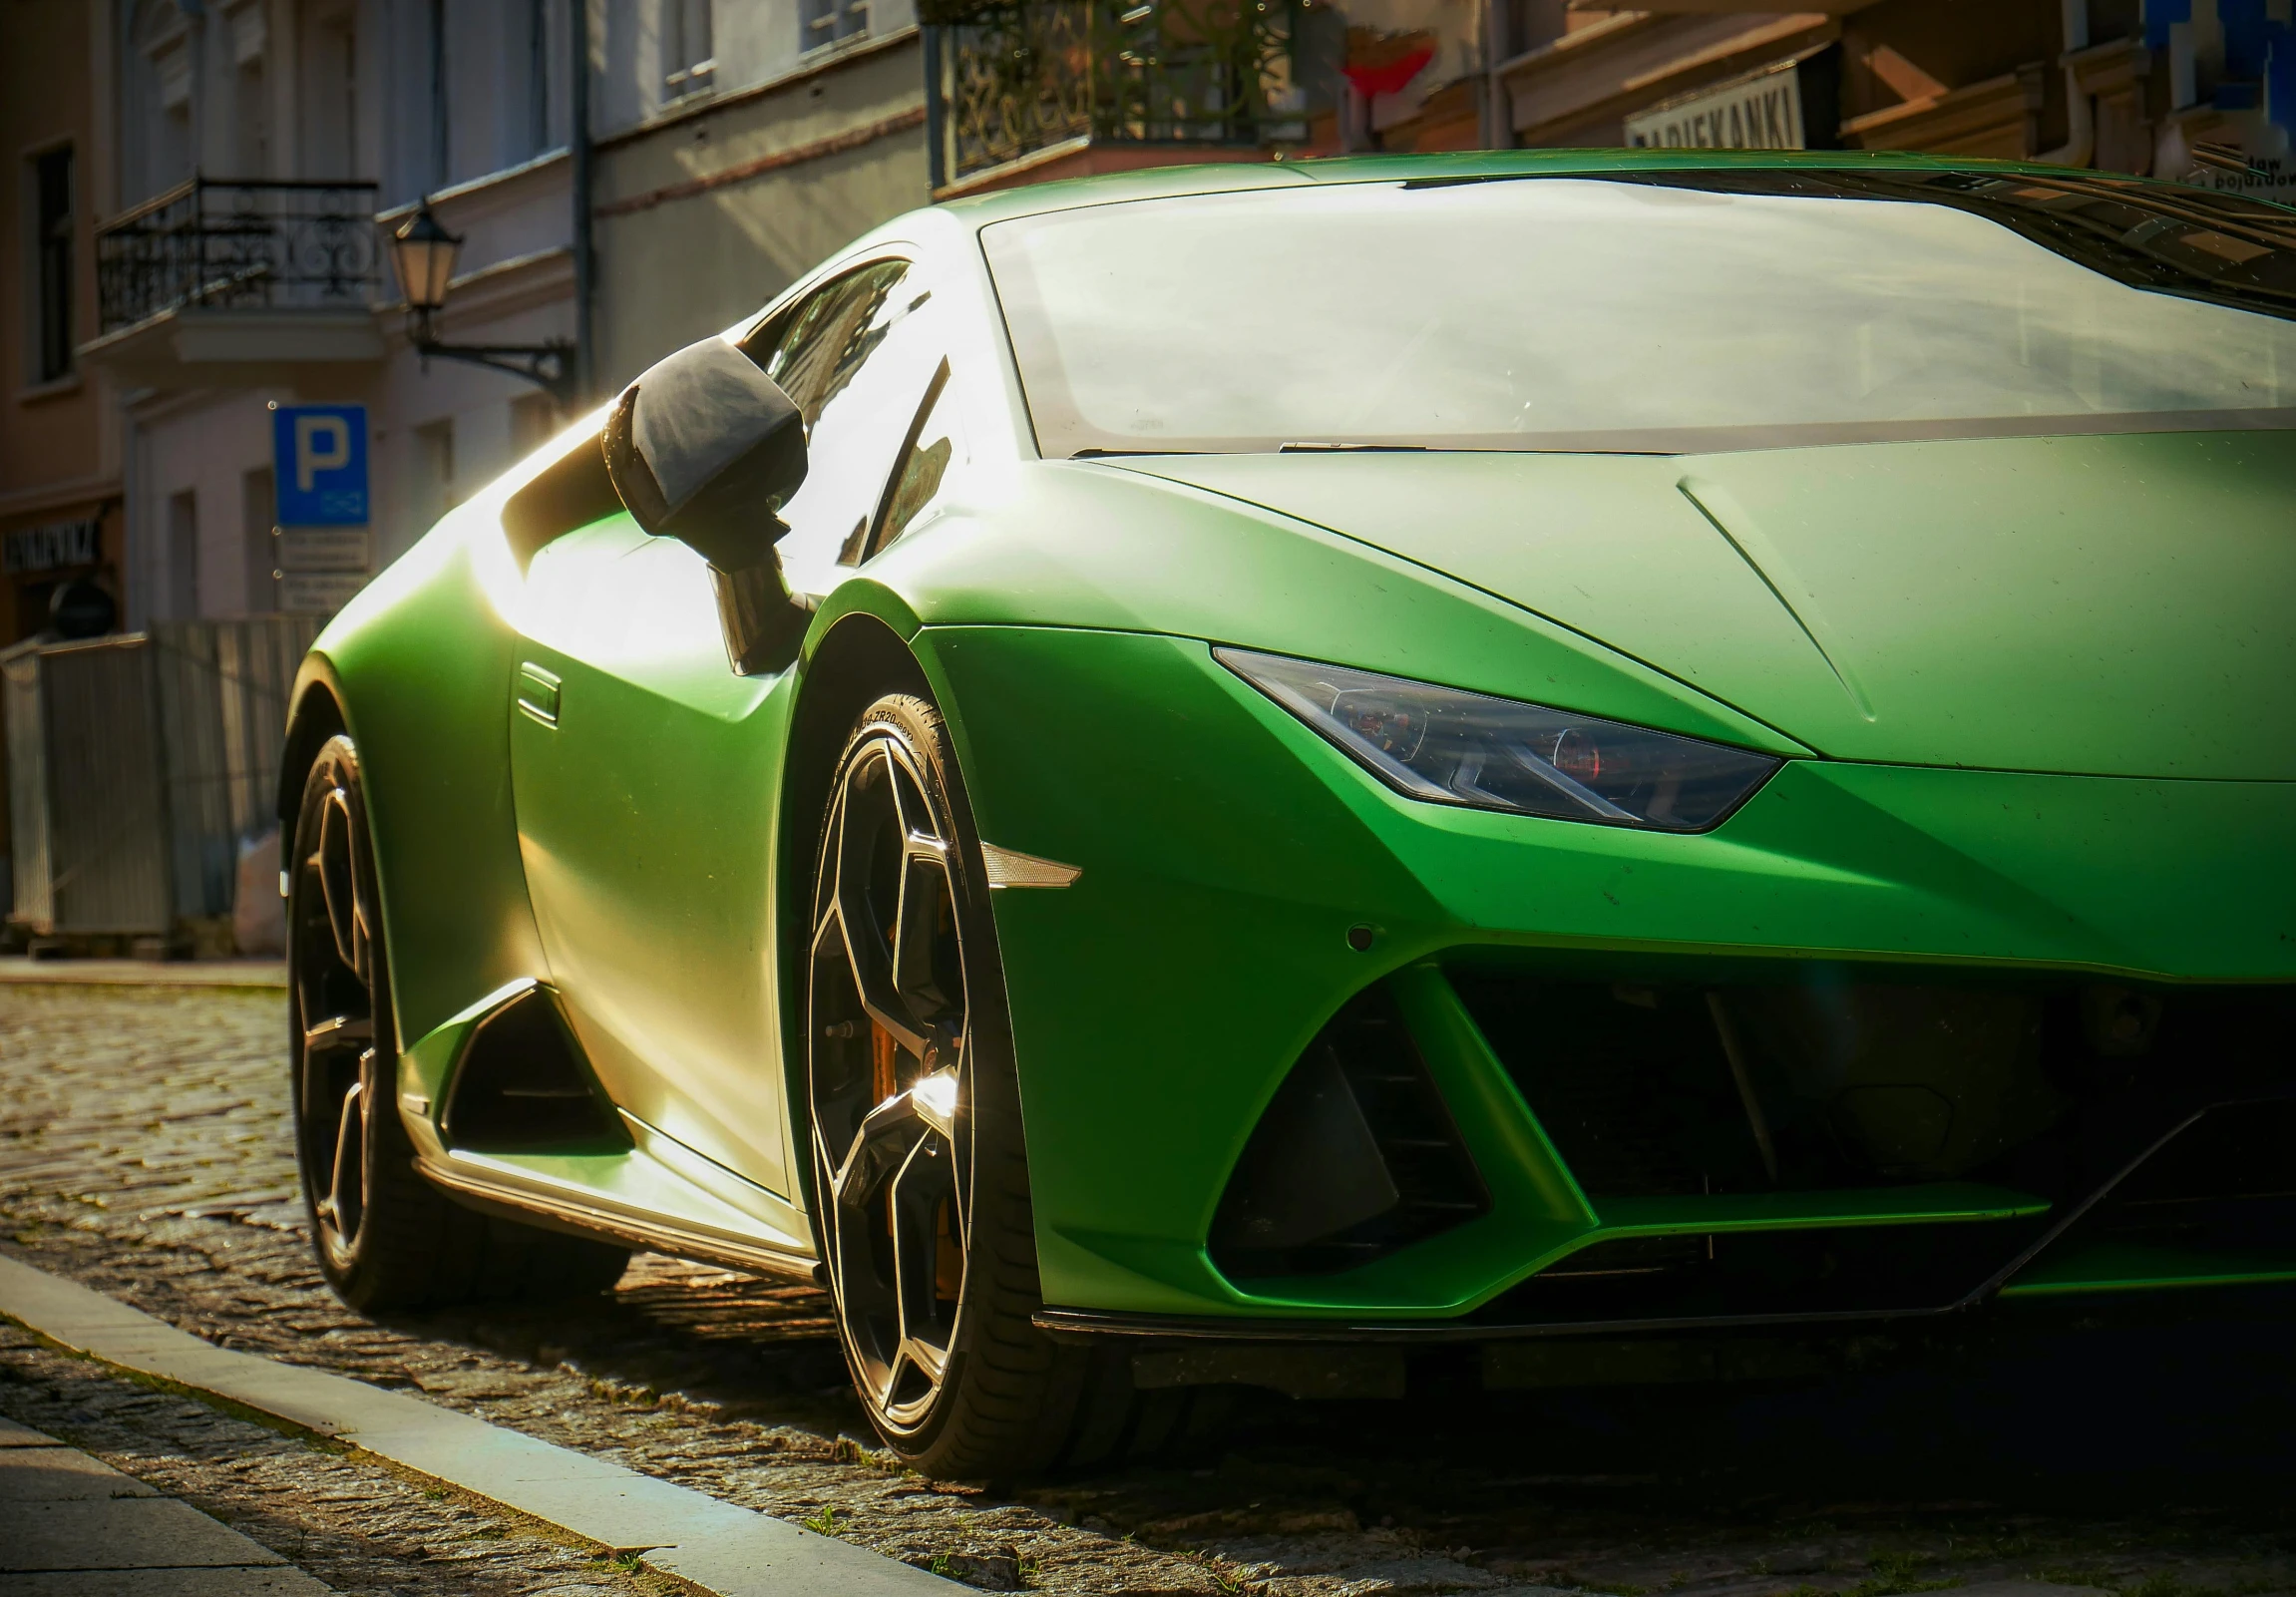 the face of a green sports car parked in a street